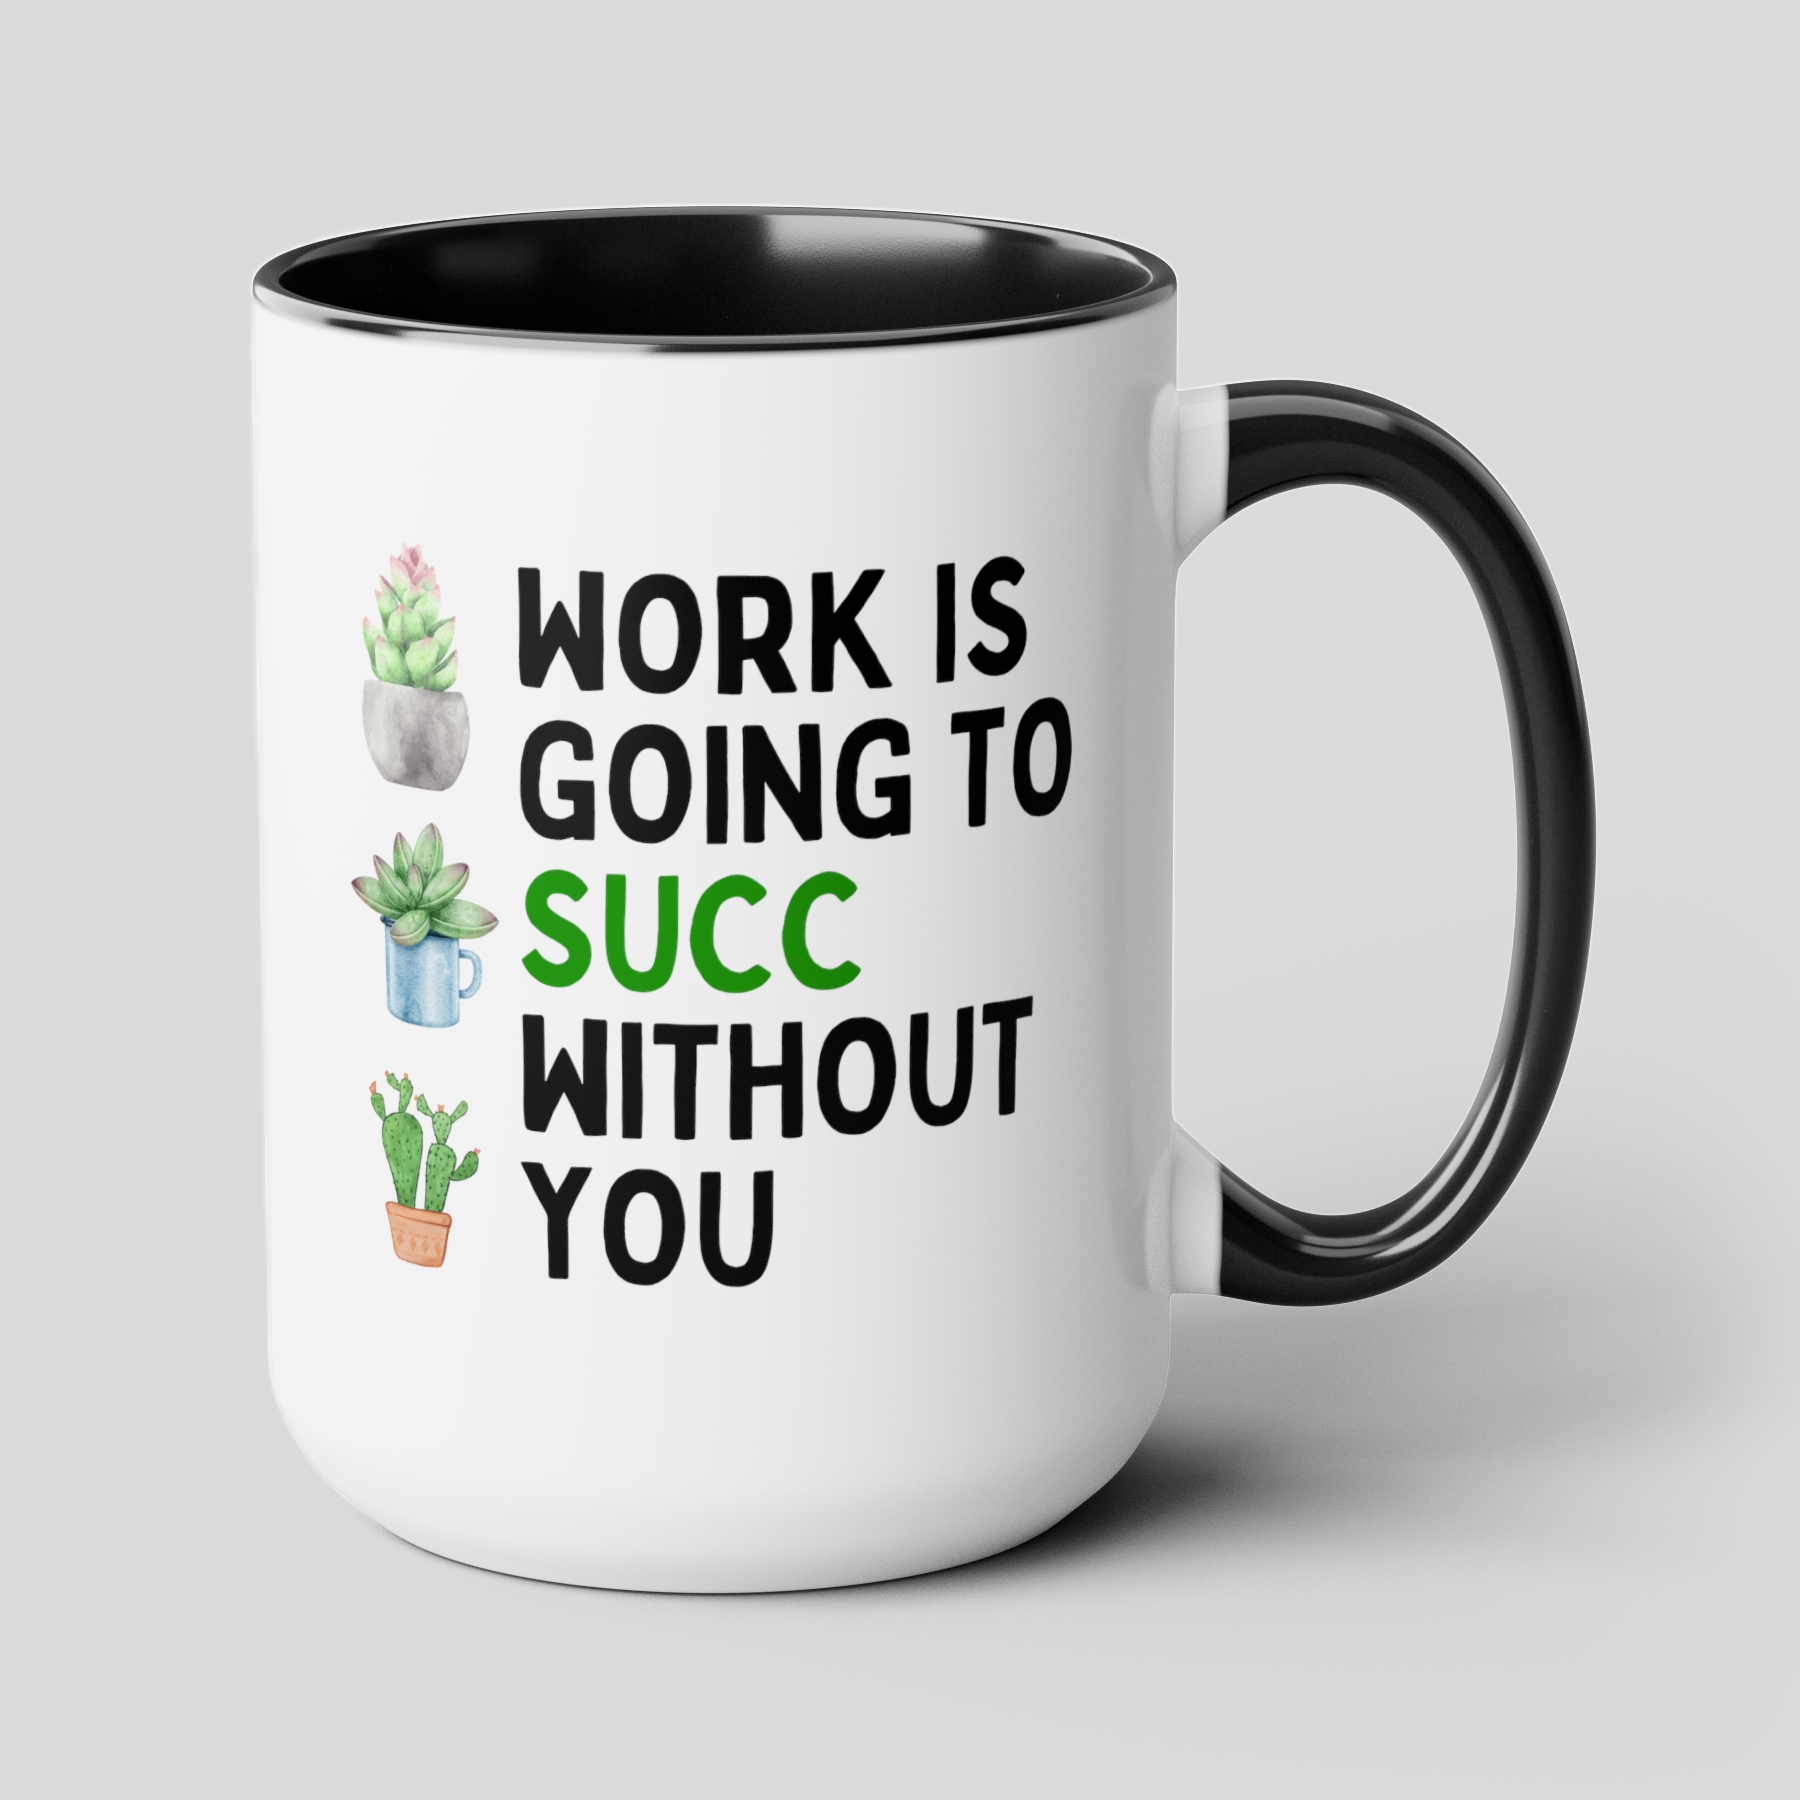 Work Is Going To Succ Without You 15oz white with black accent funny large coffee mug gift for coworker colleague leaving farewell plant lover succulents waveywares wavey wares wavywares wavy wares cover